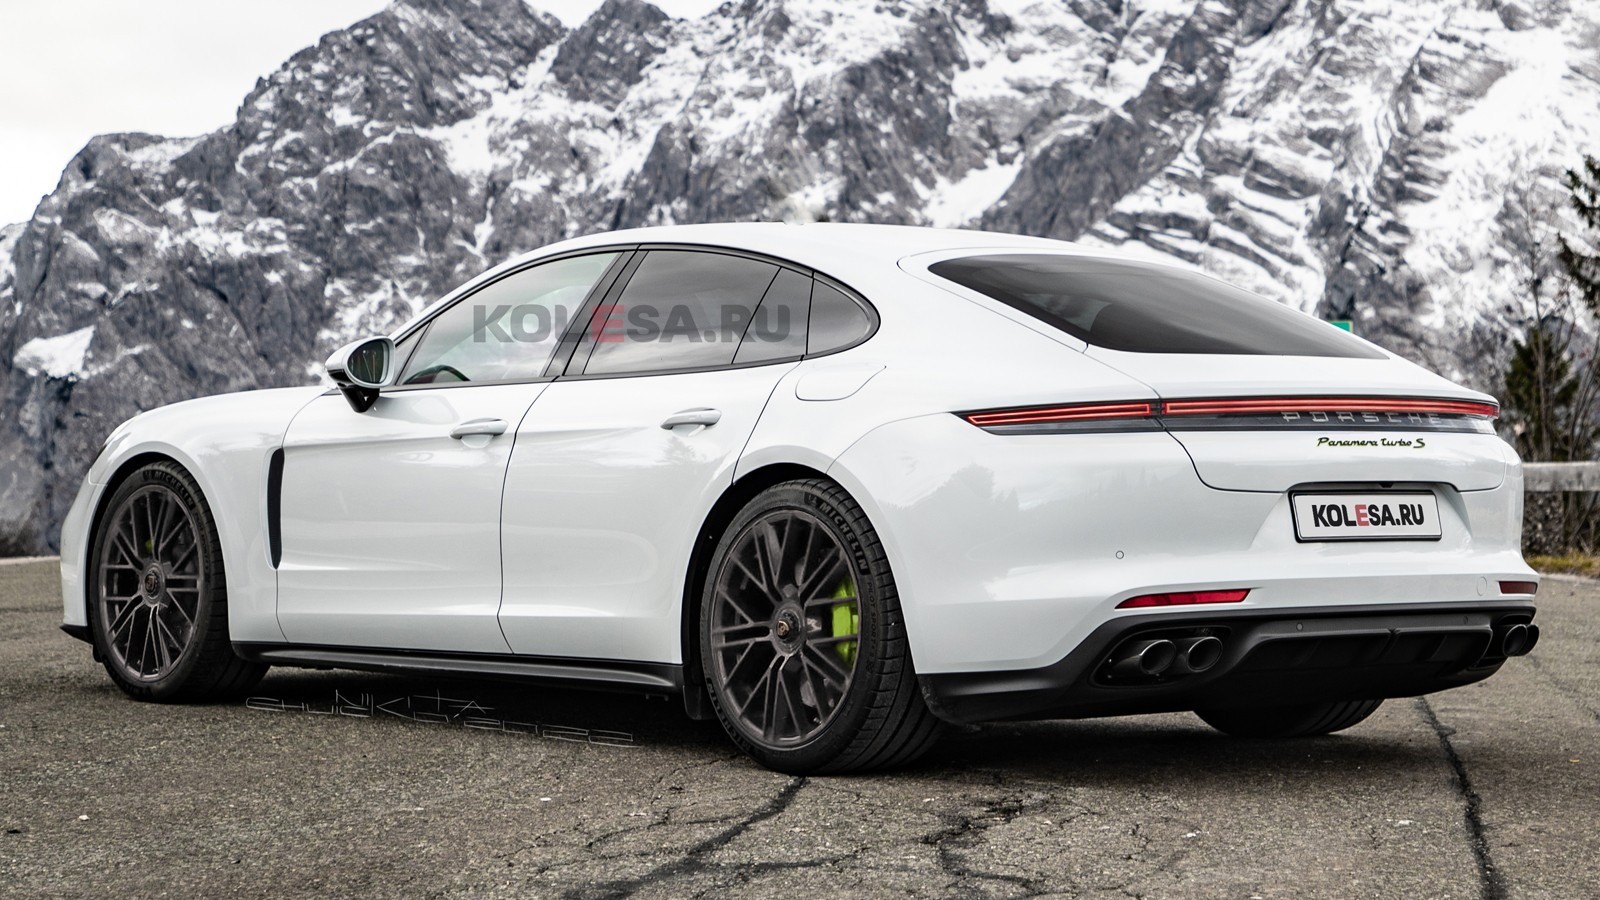 2024 Porsche Panamera Rendered With No Camo to Mess With Our Minds